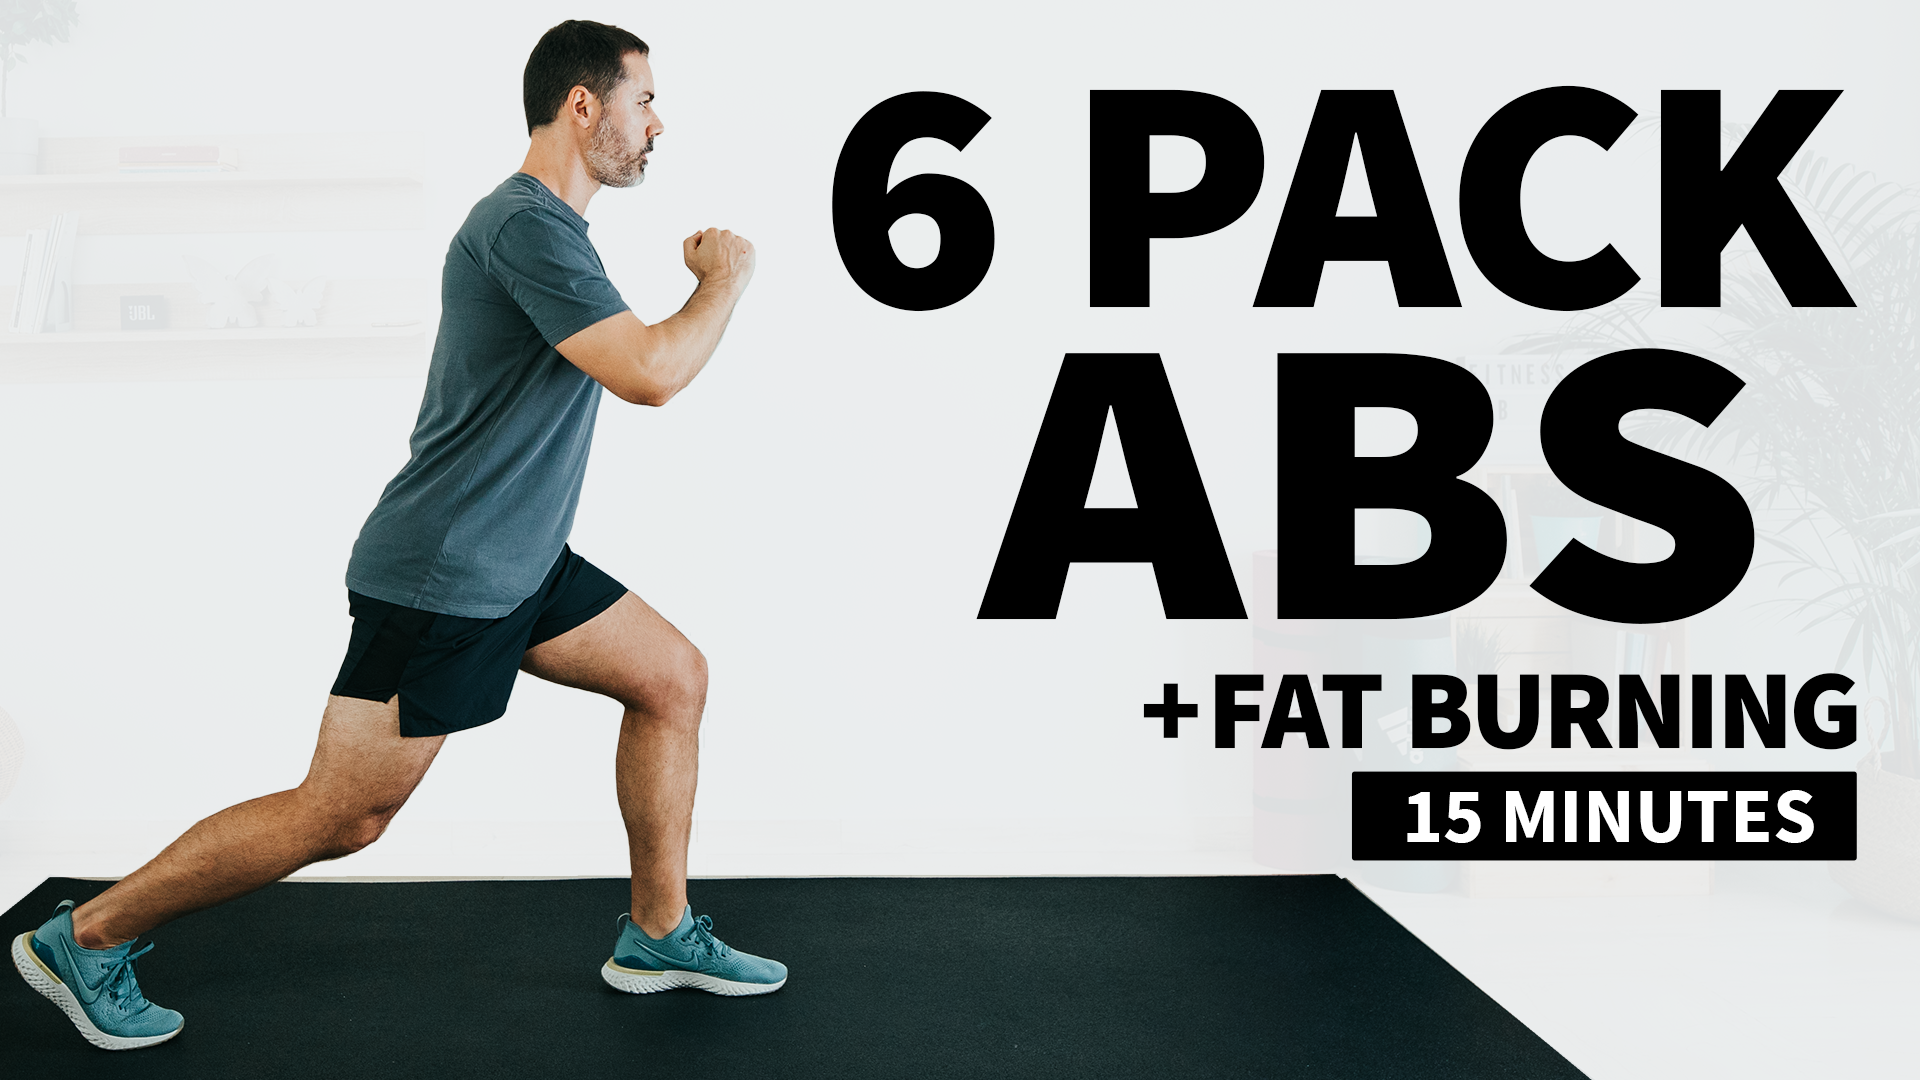 15 Min Home Workout For 6Pack Abs + Fat Burning